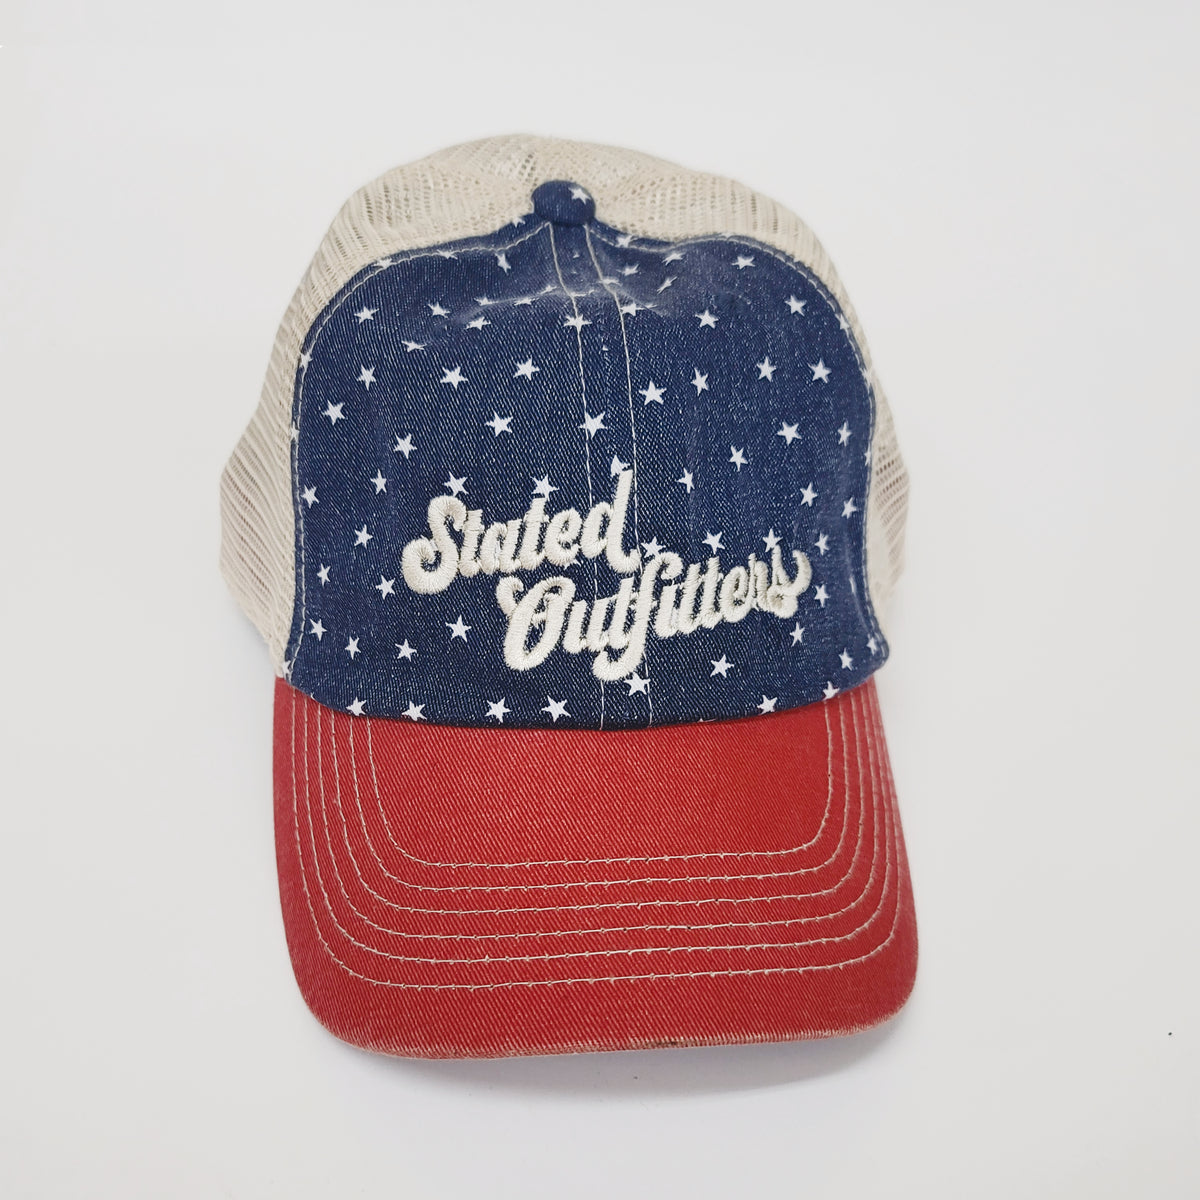 Stated Outfitters Embroidered Stars Hat